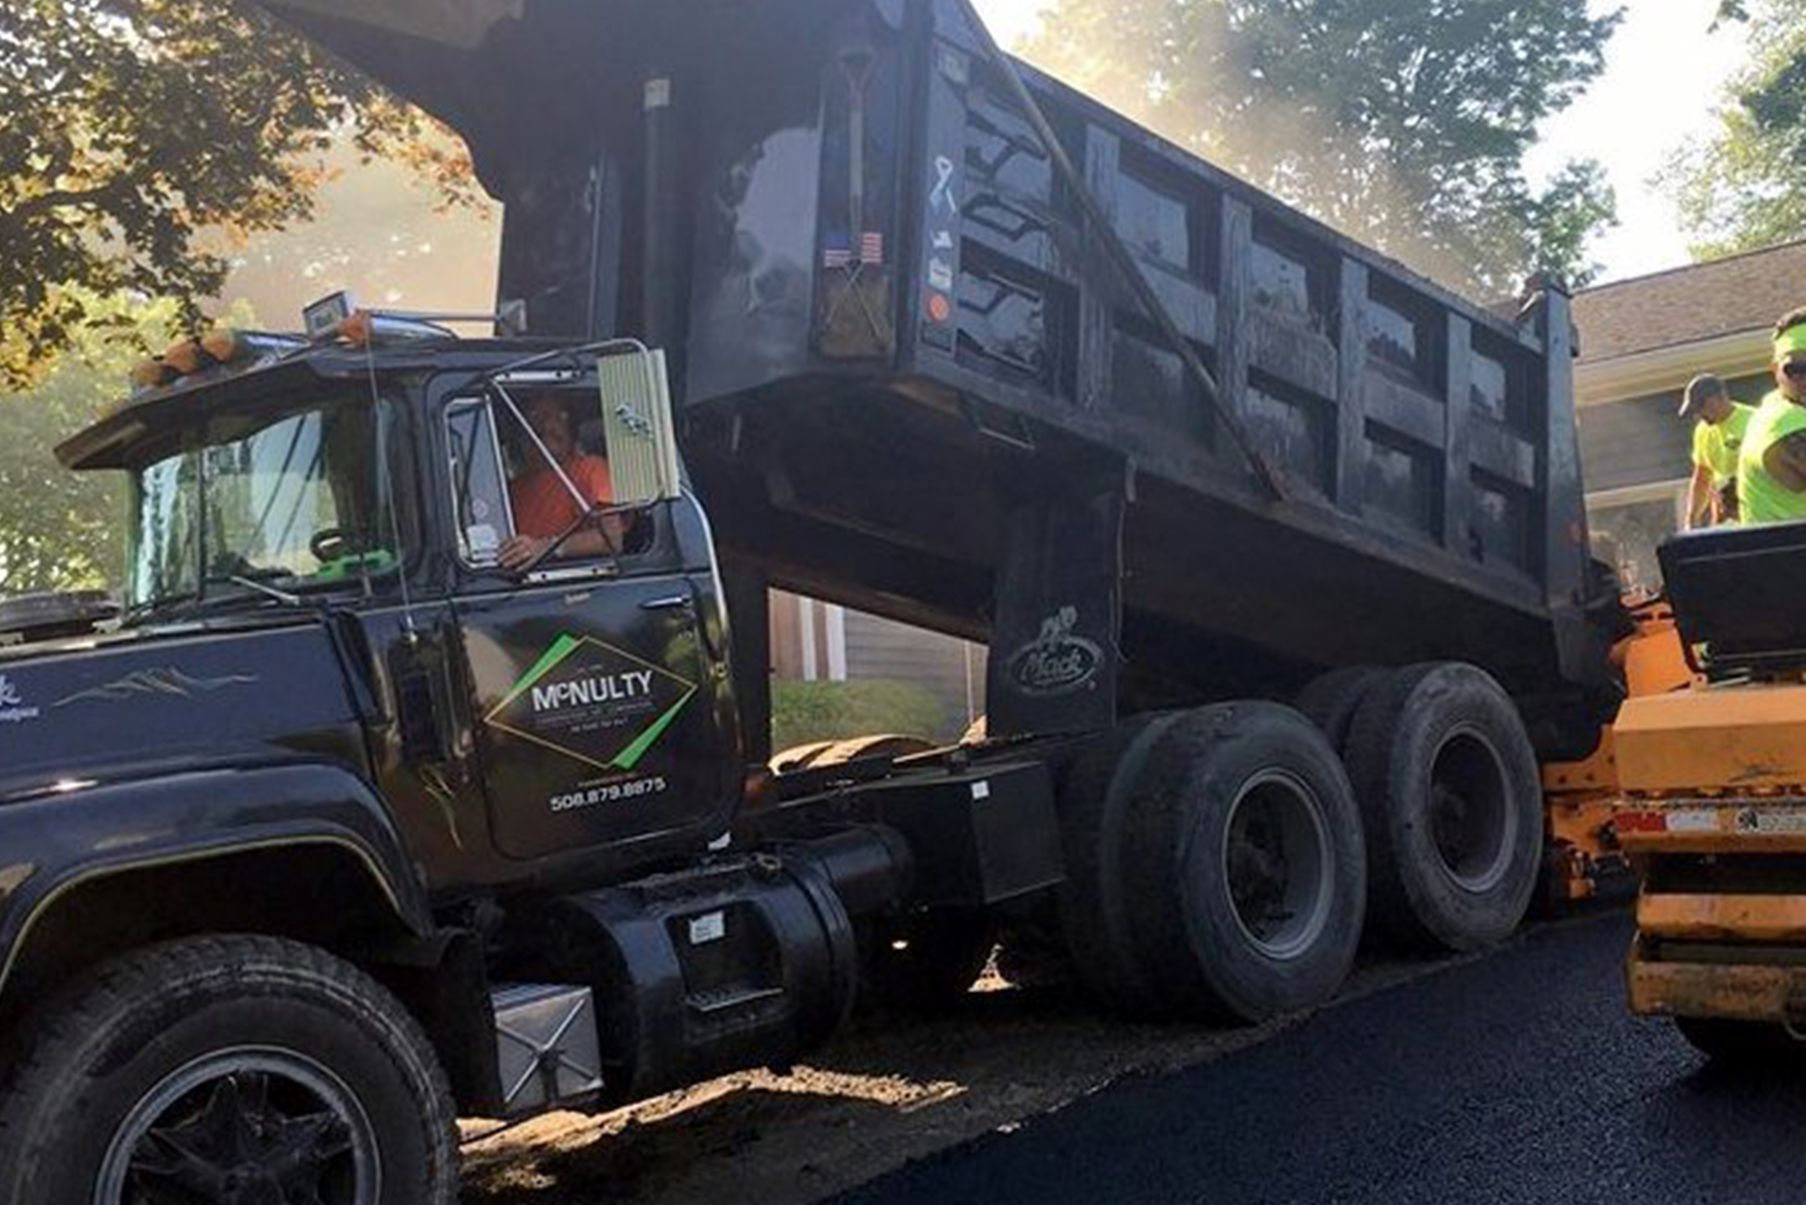 A dump truck is being loaded with asphalt on a road.